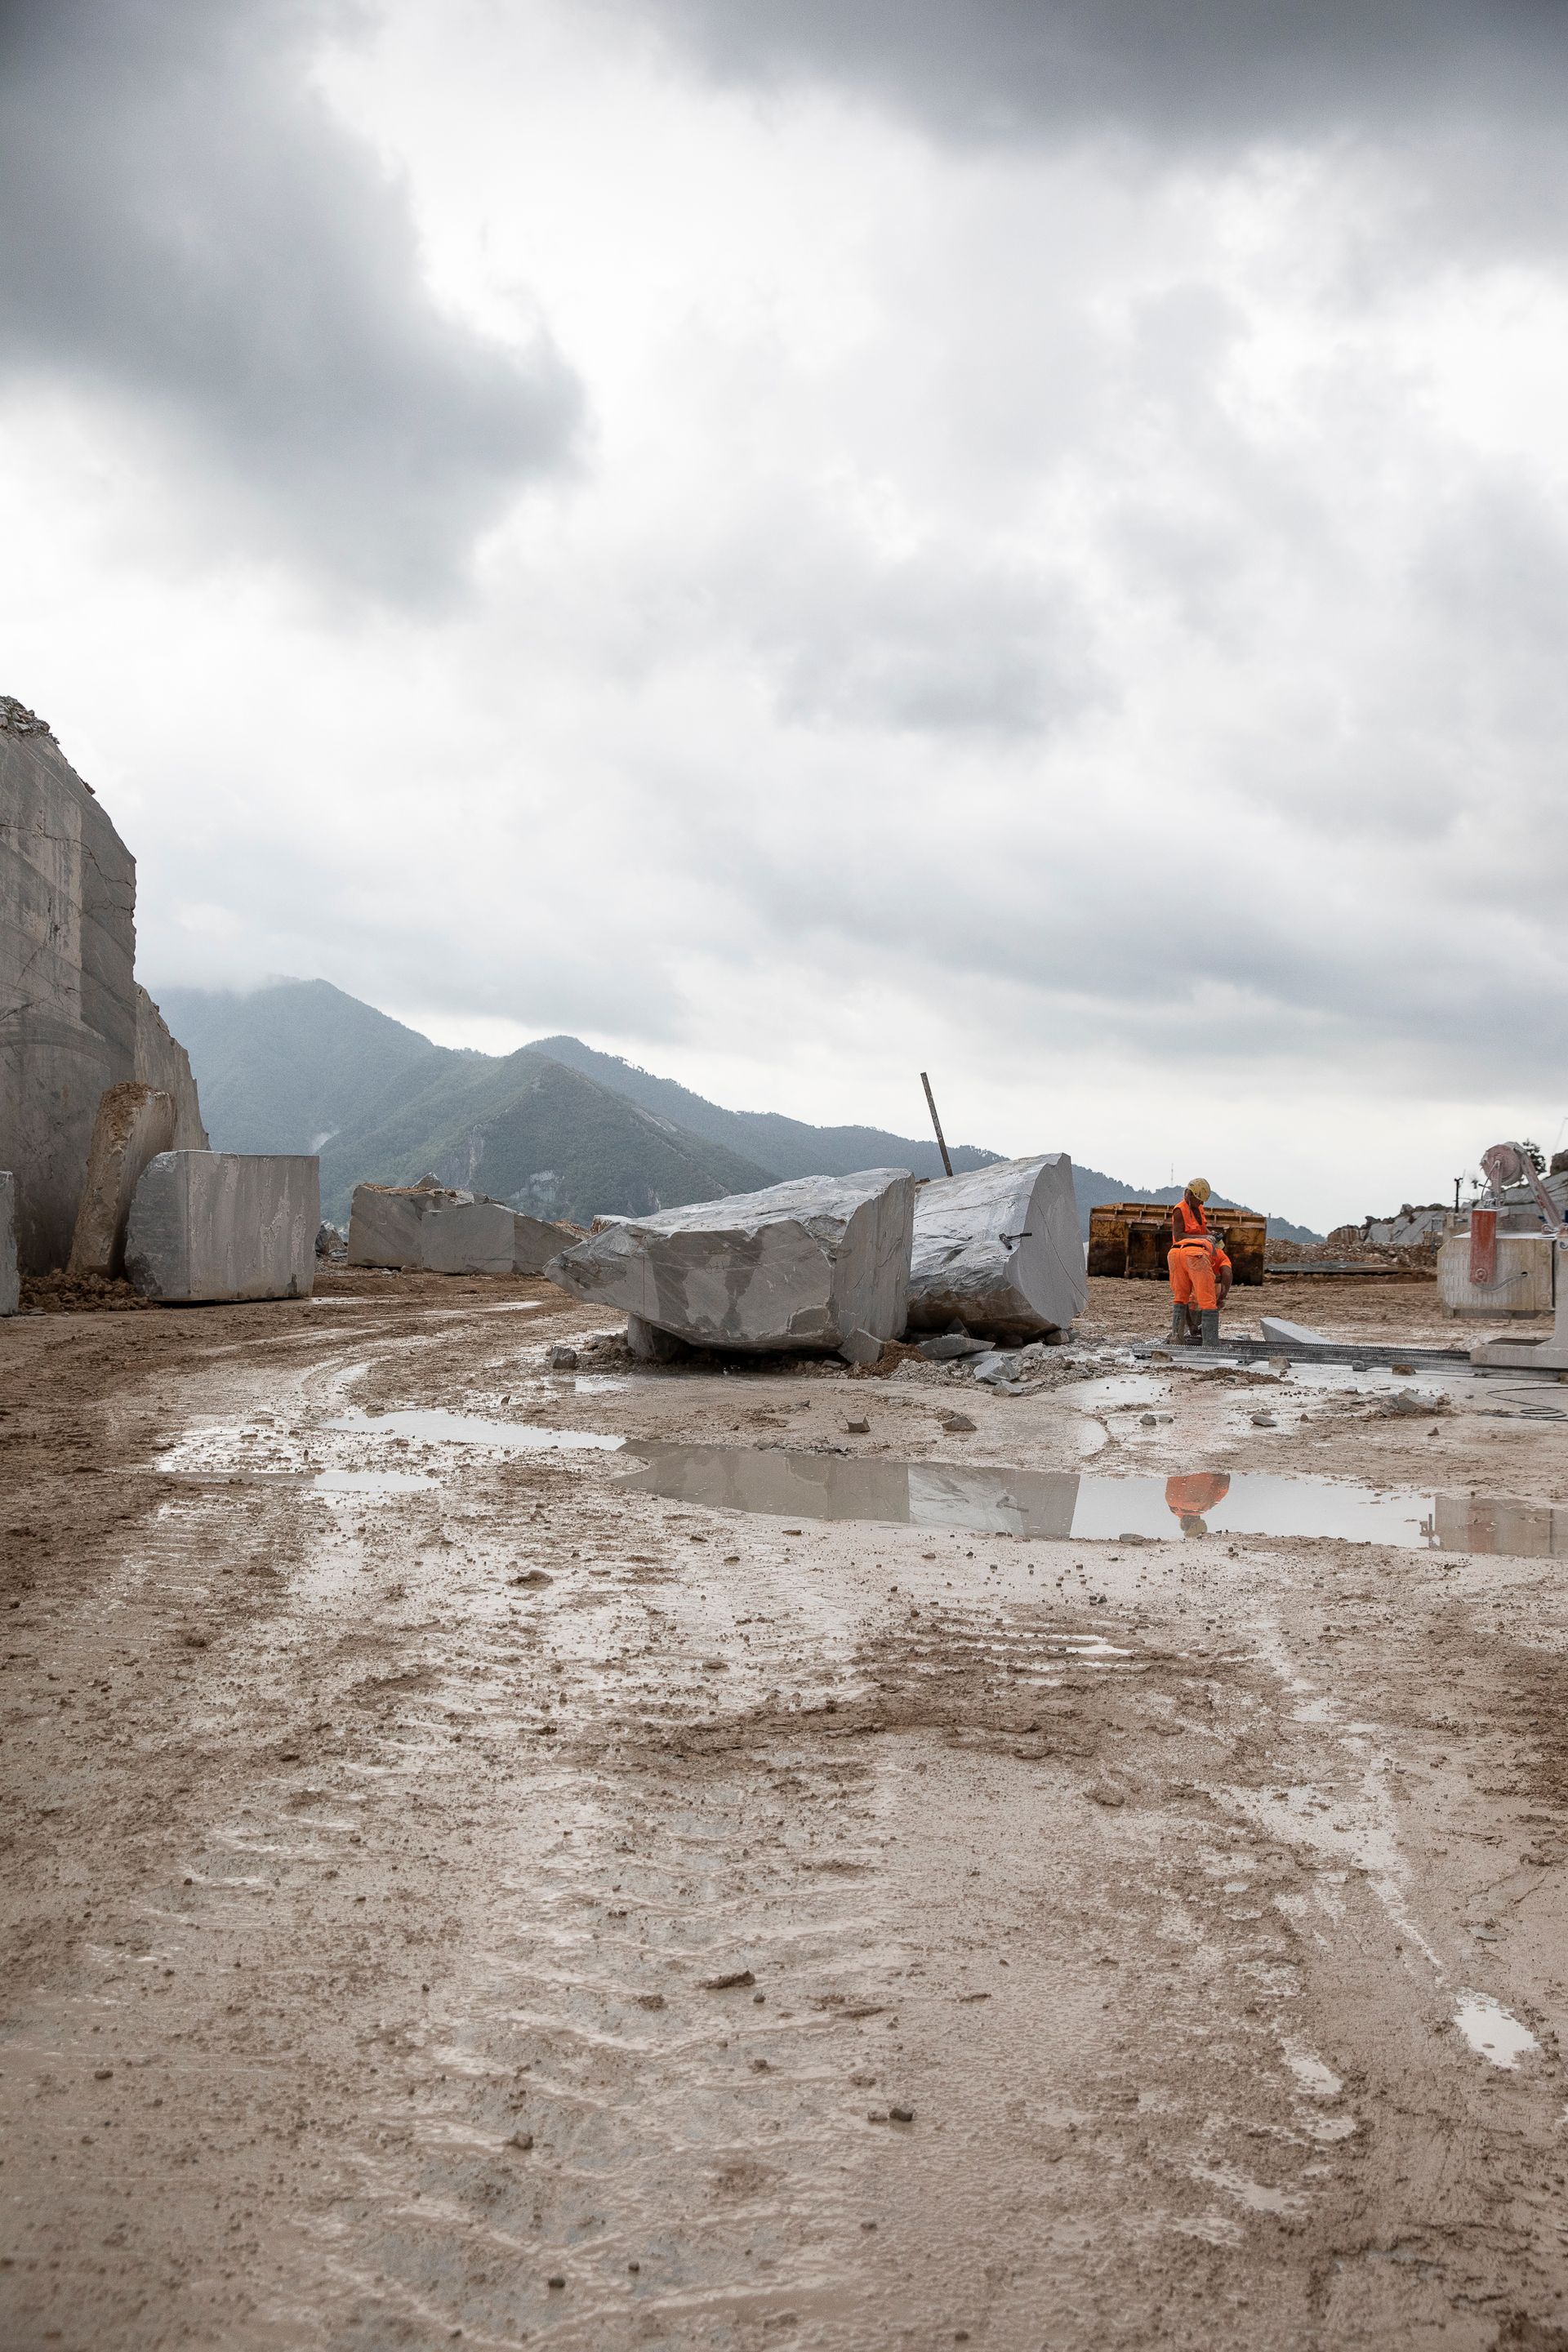 Visit to Carrara marble quarry, Tuscany, choice of materials and slabs. Officina Magisafi architecture design - marble mining